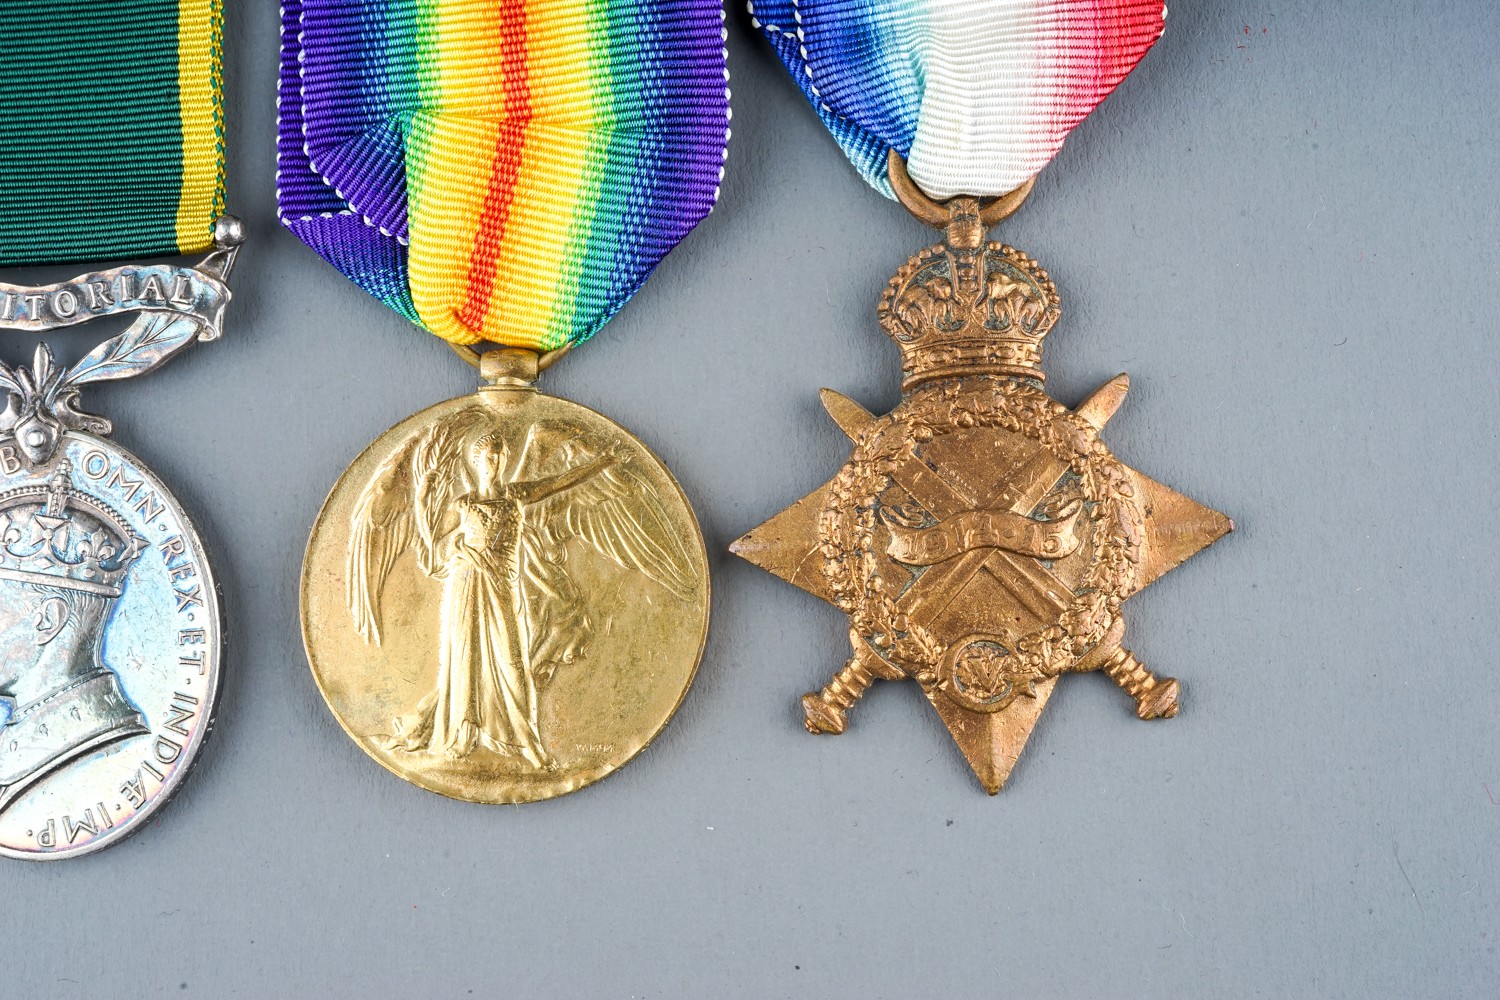 A collection of British Medals. Great War Pair - R-29124 A Cpl H H Simpkins K R Rif C. Condition - Image 6 of 12